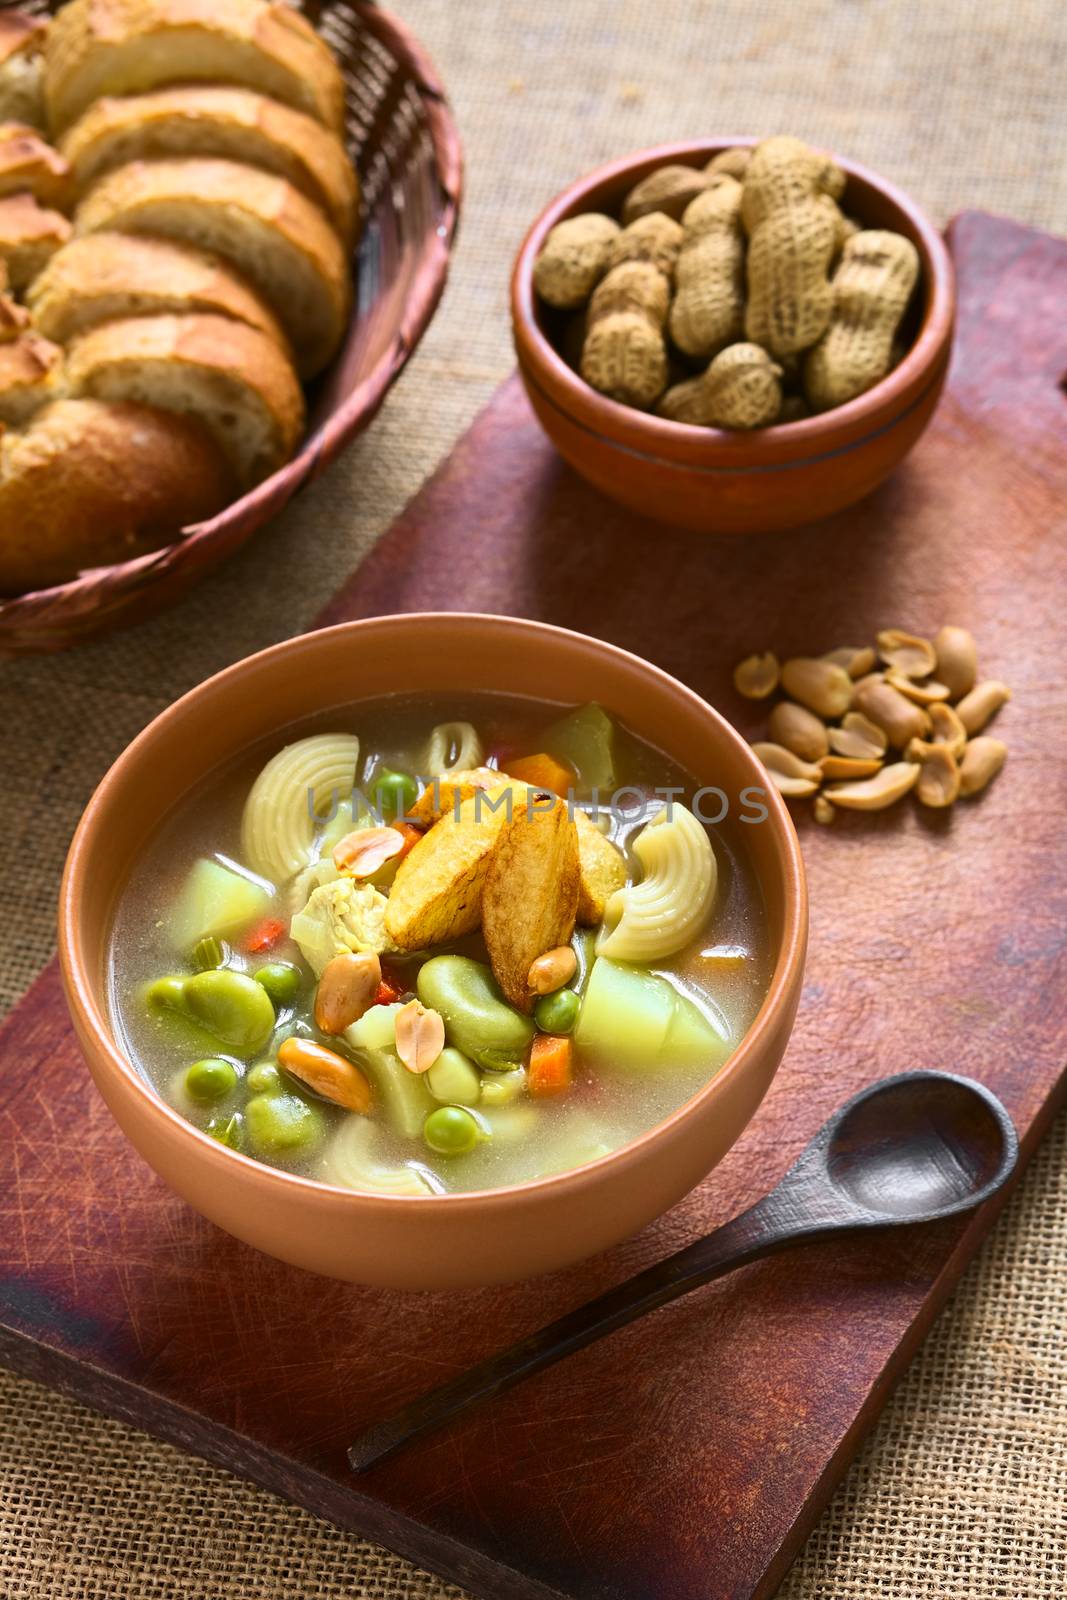 Bowl of traditional Bolivian Sopa de Mani (peanut soup) made of meat, pasta, vegetables (pea, carrot, potato, broad bean, pepper, corn) and ground peanut, traditionally served with fried potatoes, photographed with natural light (Selective Focus, Focus in the middle of the soup)